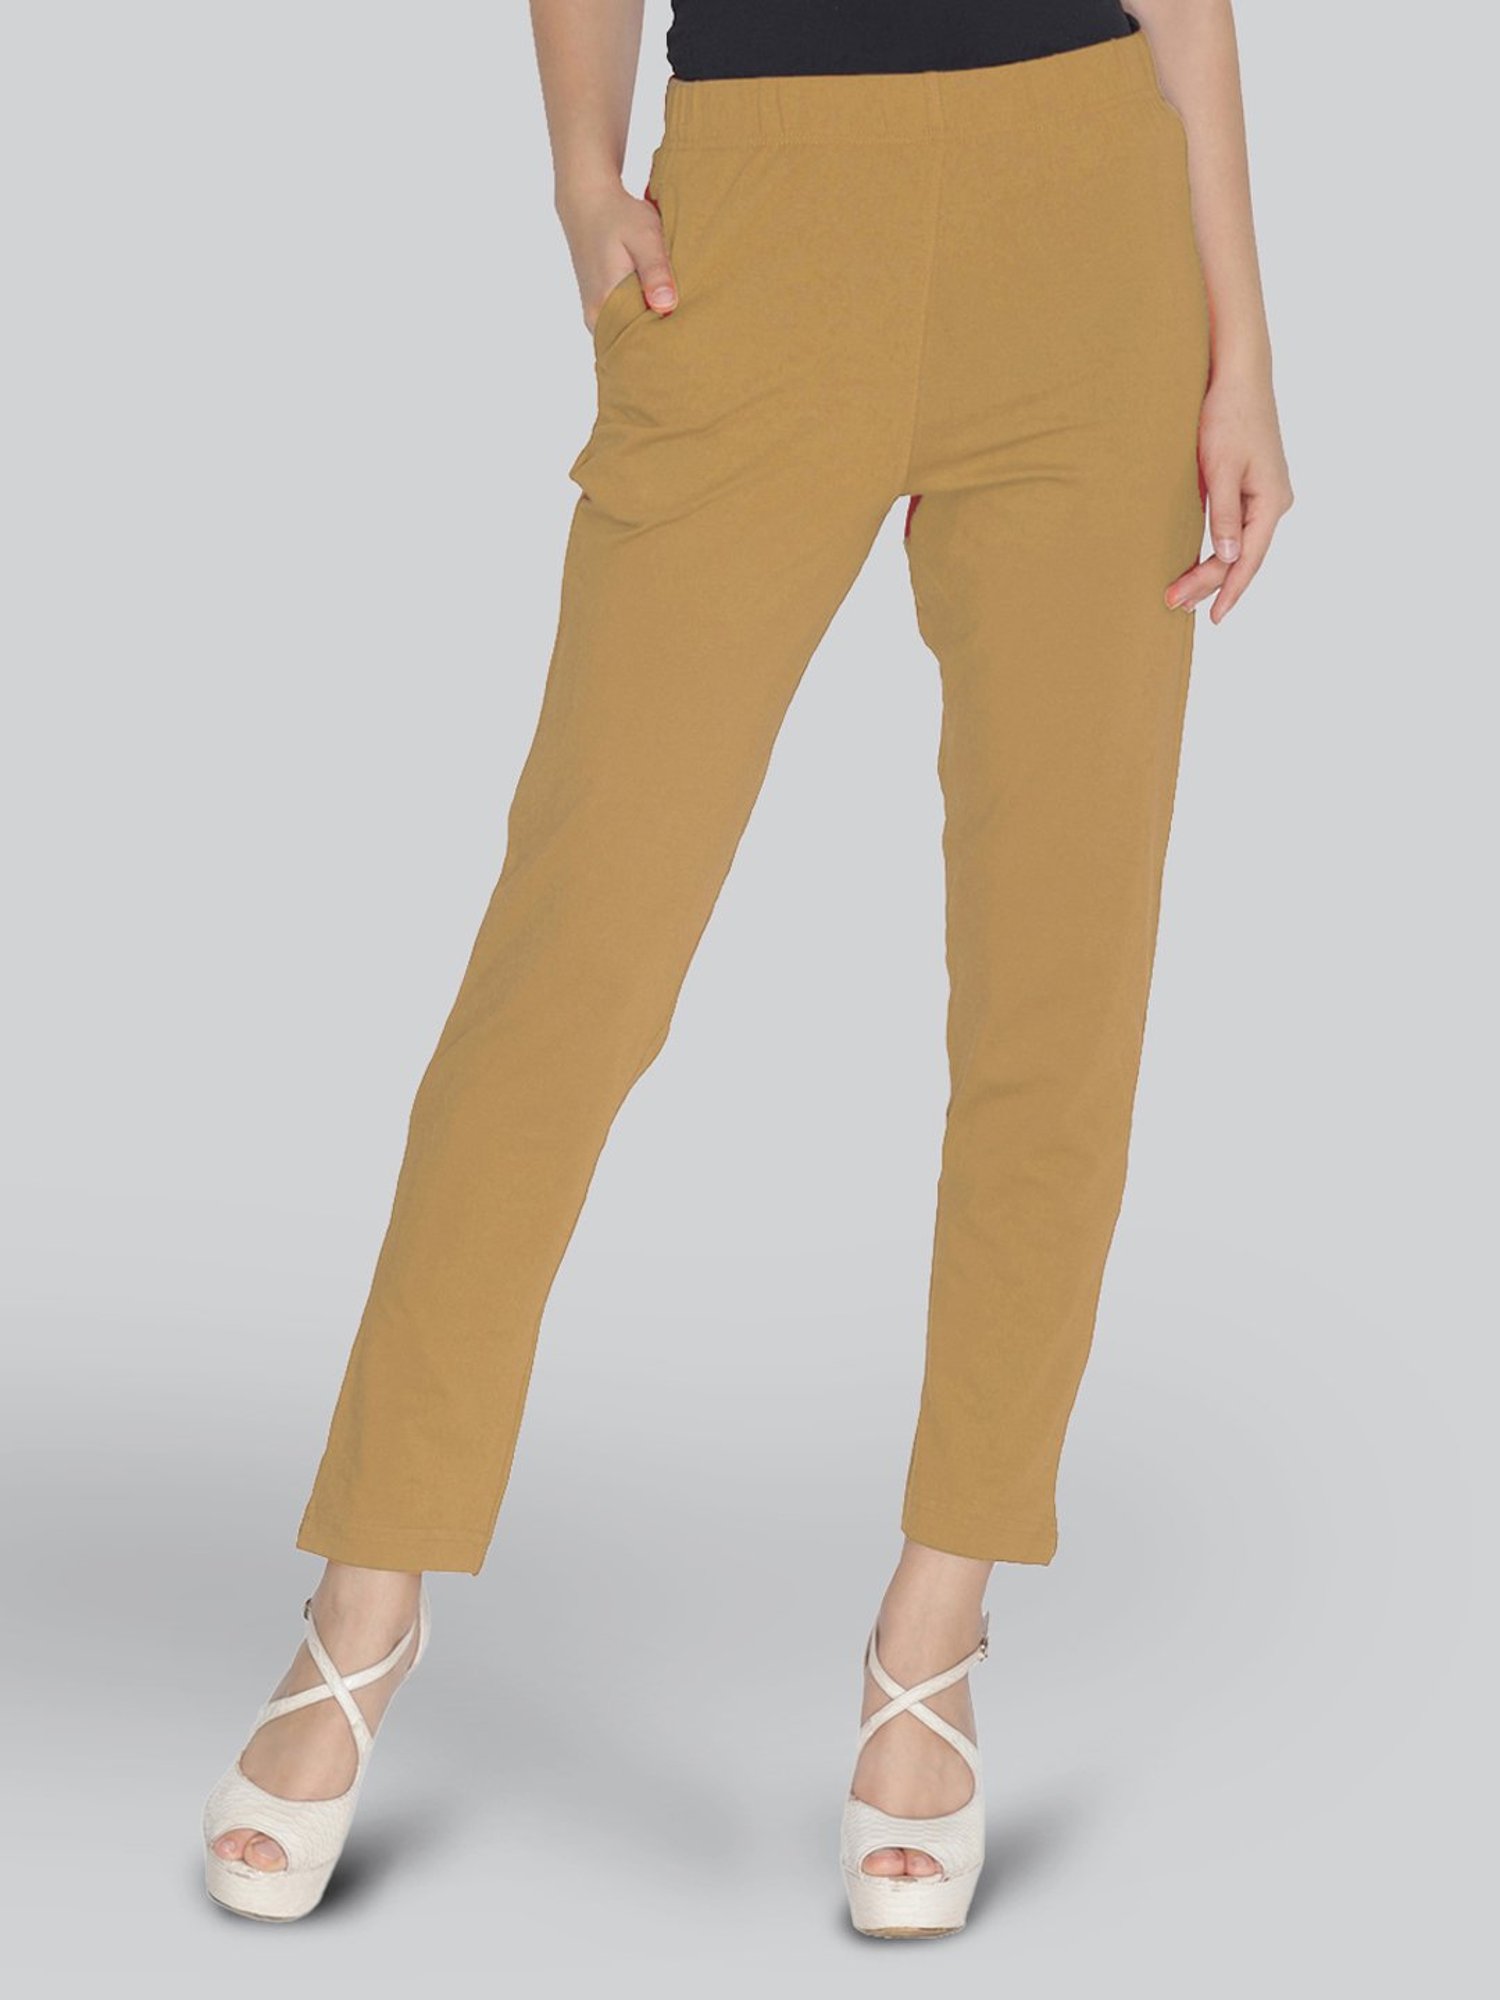 Buy White Trousers & Pants for Women by Amydus Online | Ajio.com